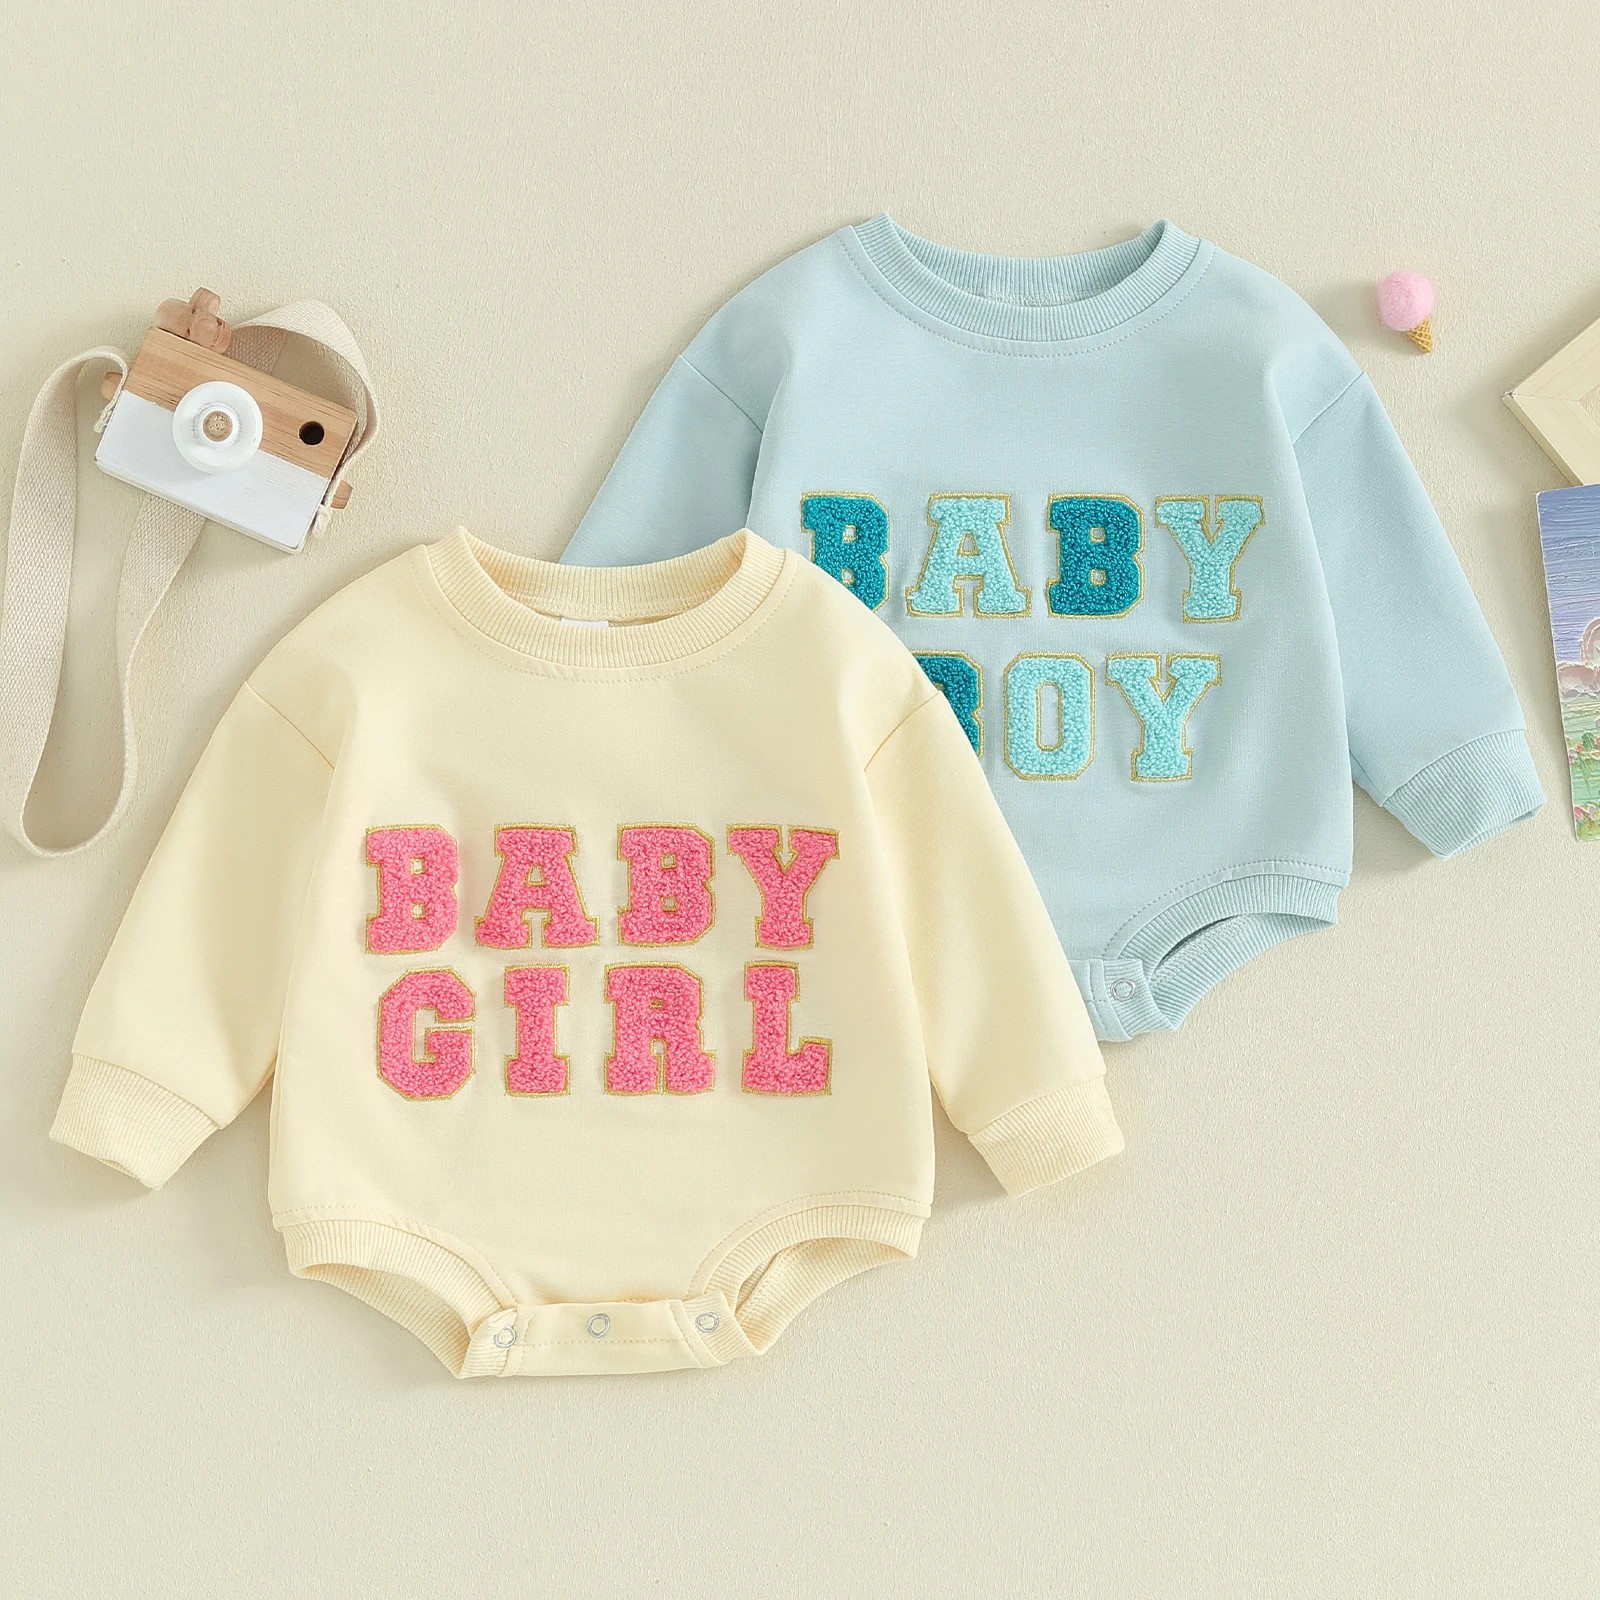 

Baby Fuzzy Sweatshirt Romper Tops Newborn Infant Girls Letter Embroidery Long Sleeve Bodysuit Spring Casual Jumpsuit Clothes